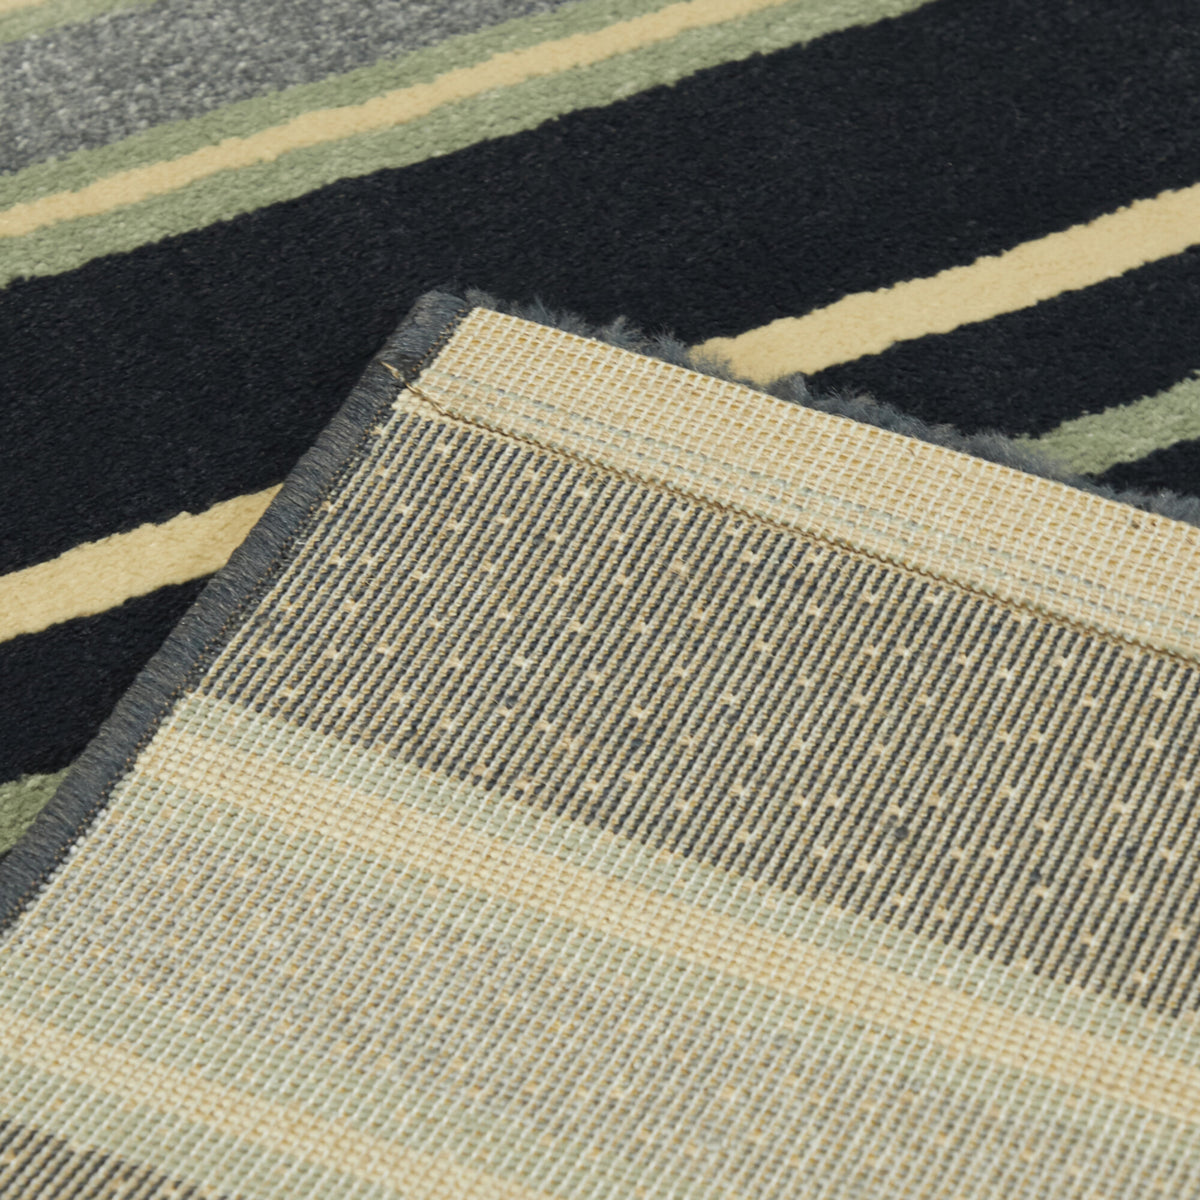 Lewis Striped Area Rug